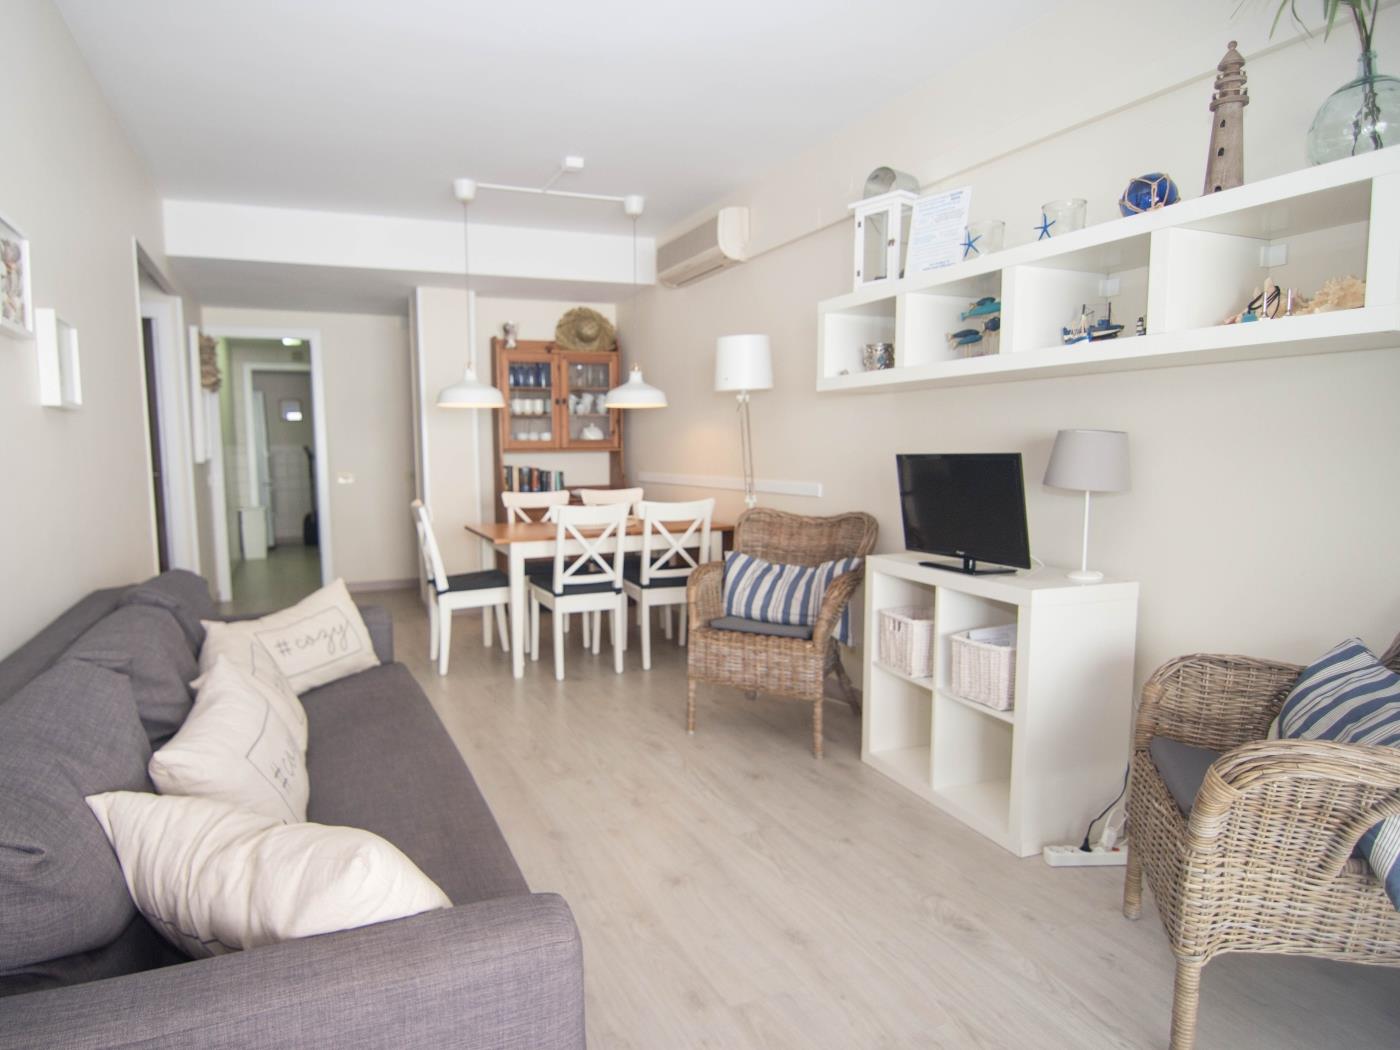 LIGHTHOUSE BY BLAUSITGES Bright apartment with pool near the center of Sitges. in SITGES